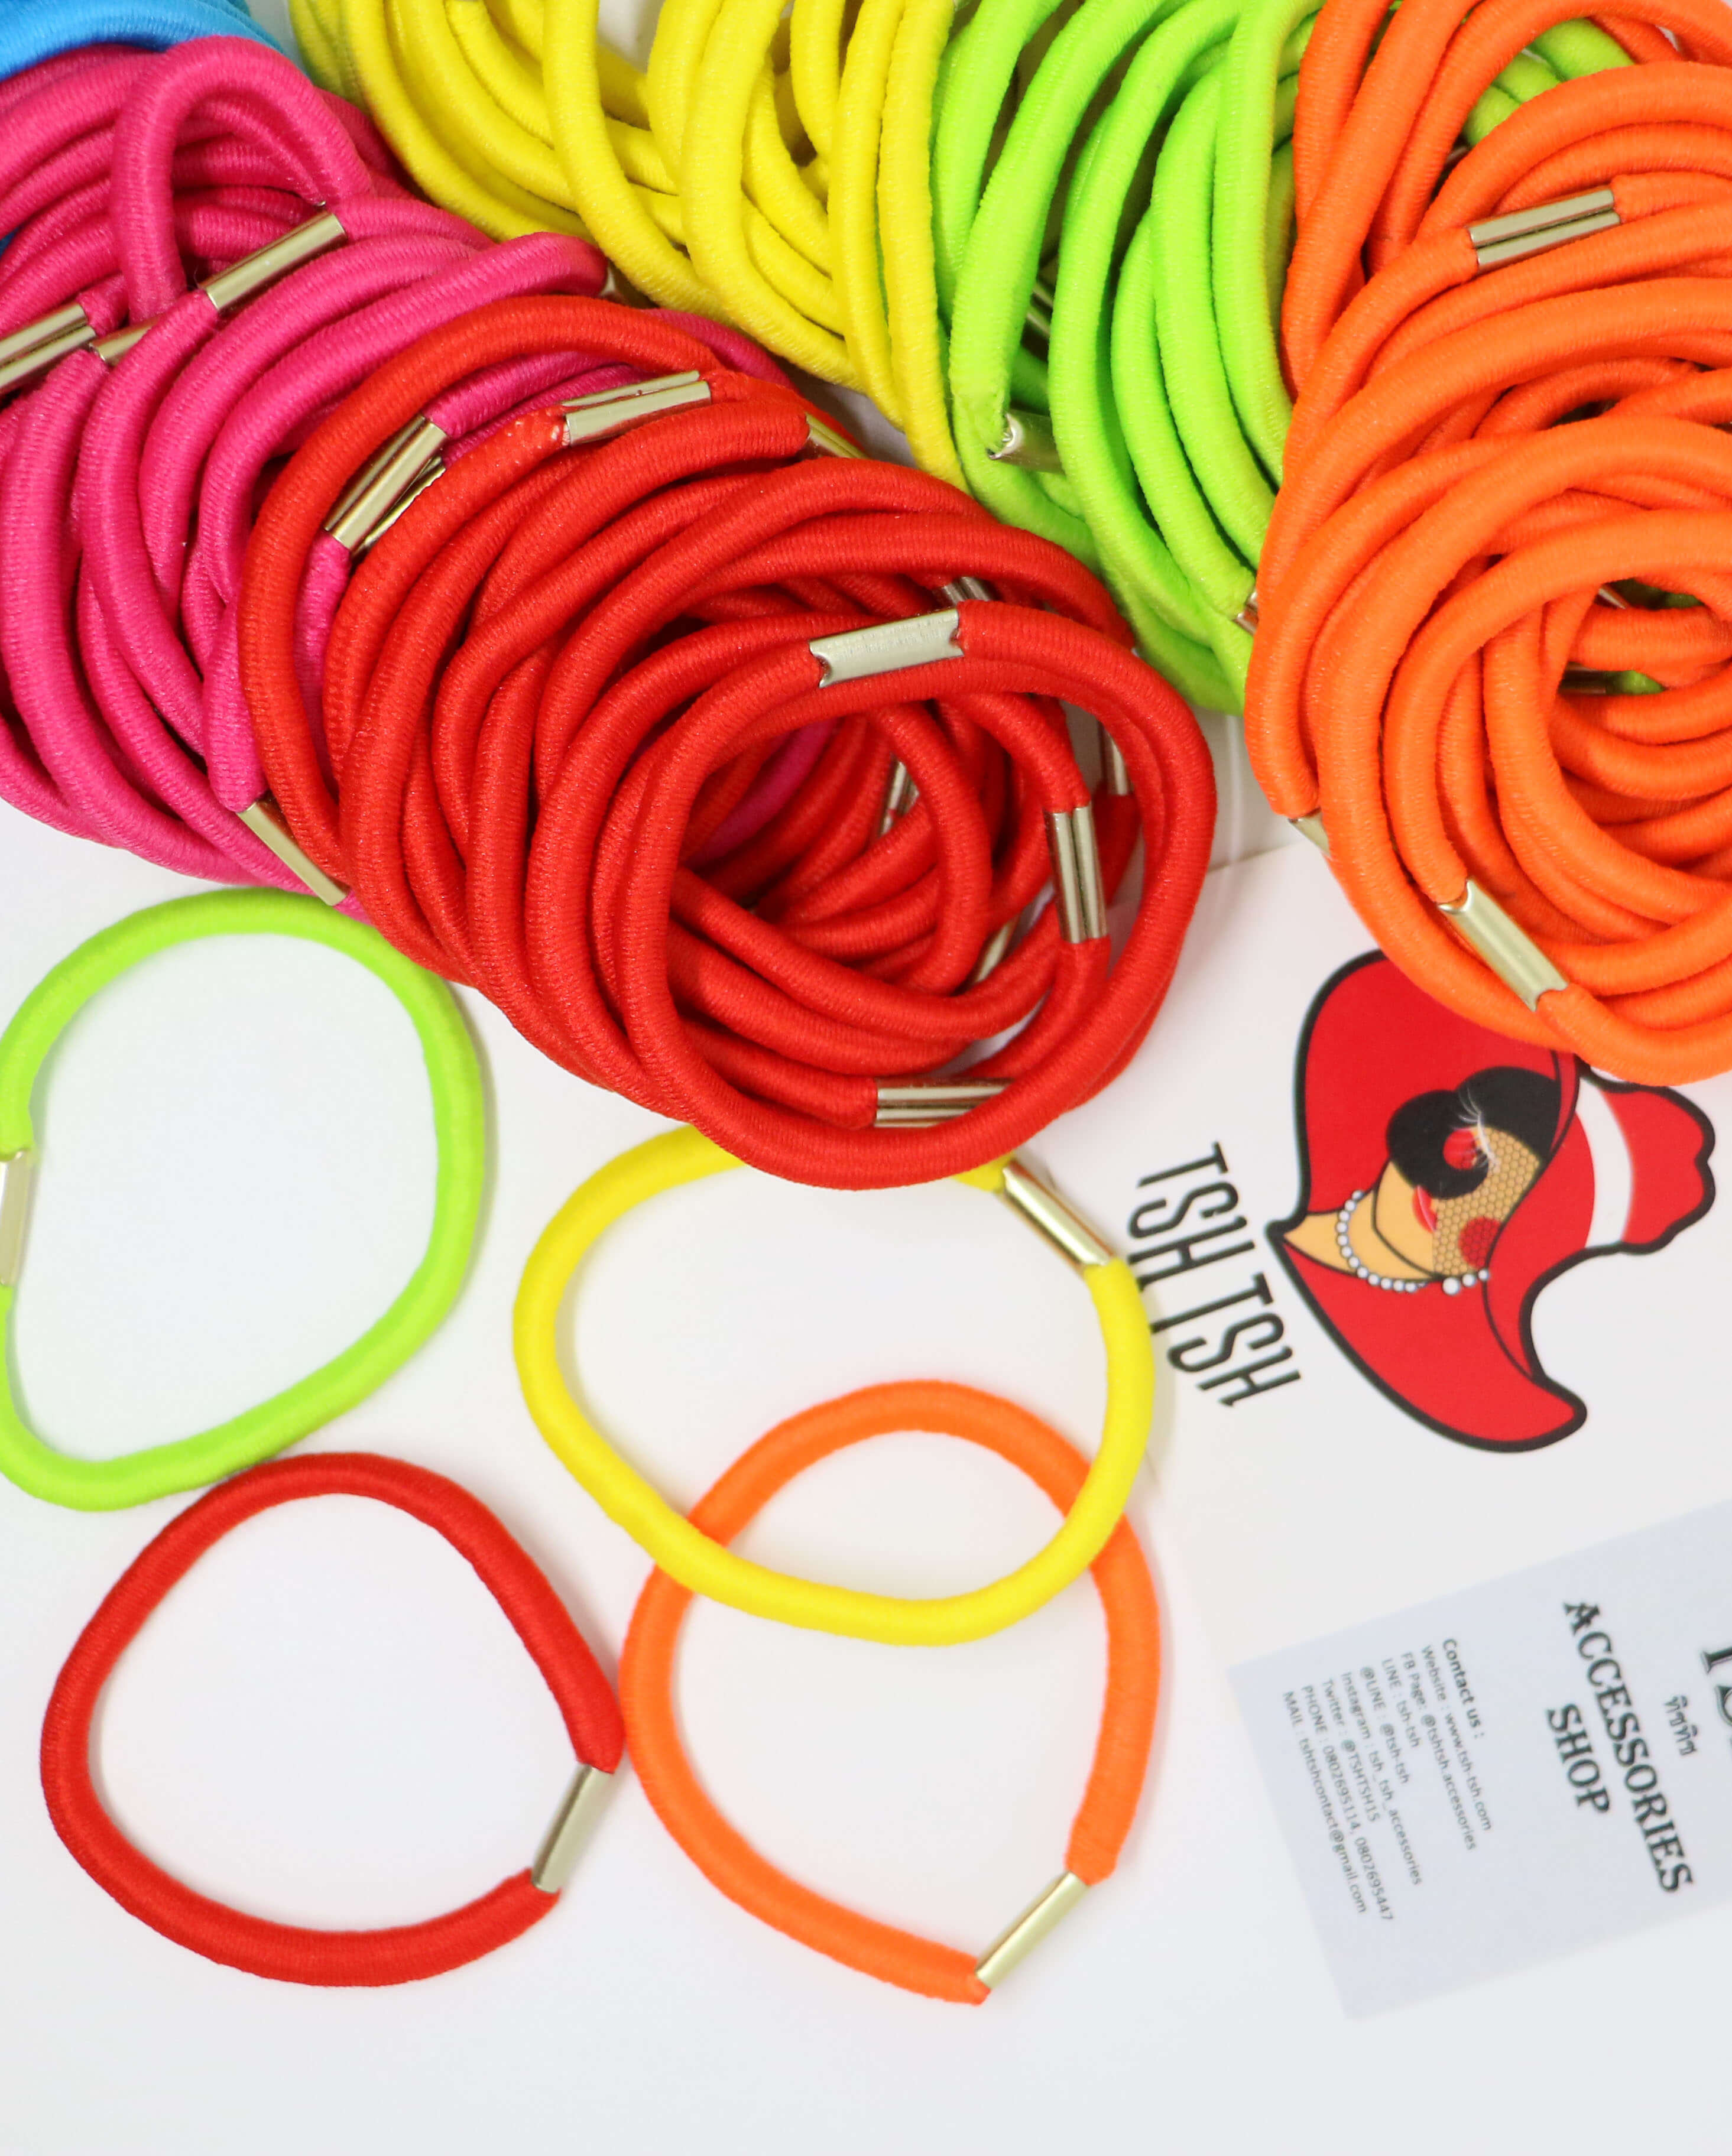 Round rubber hair band 0.4